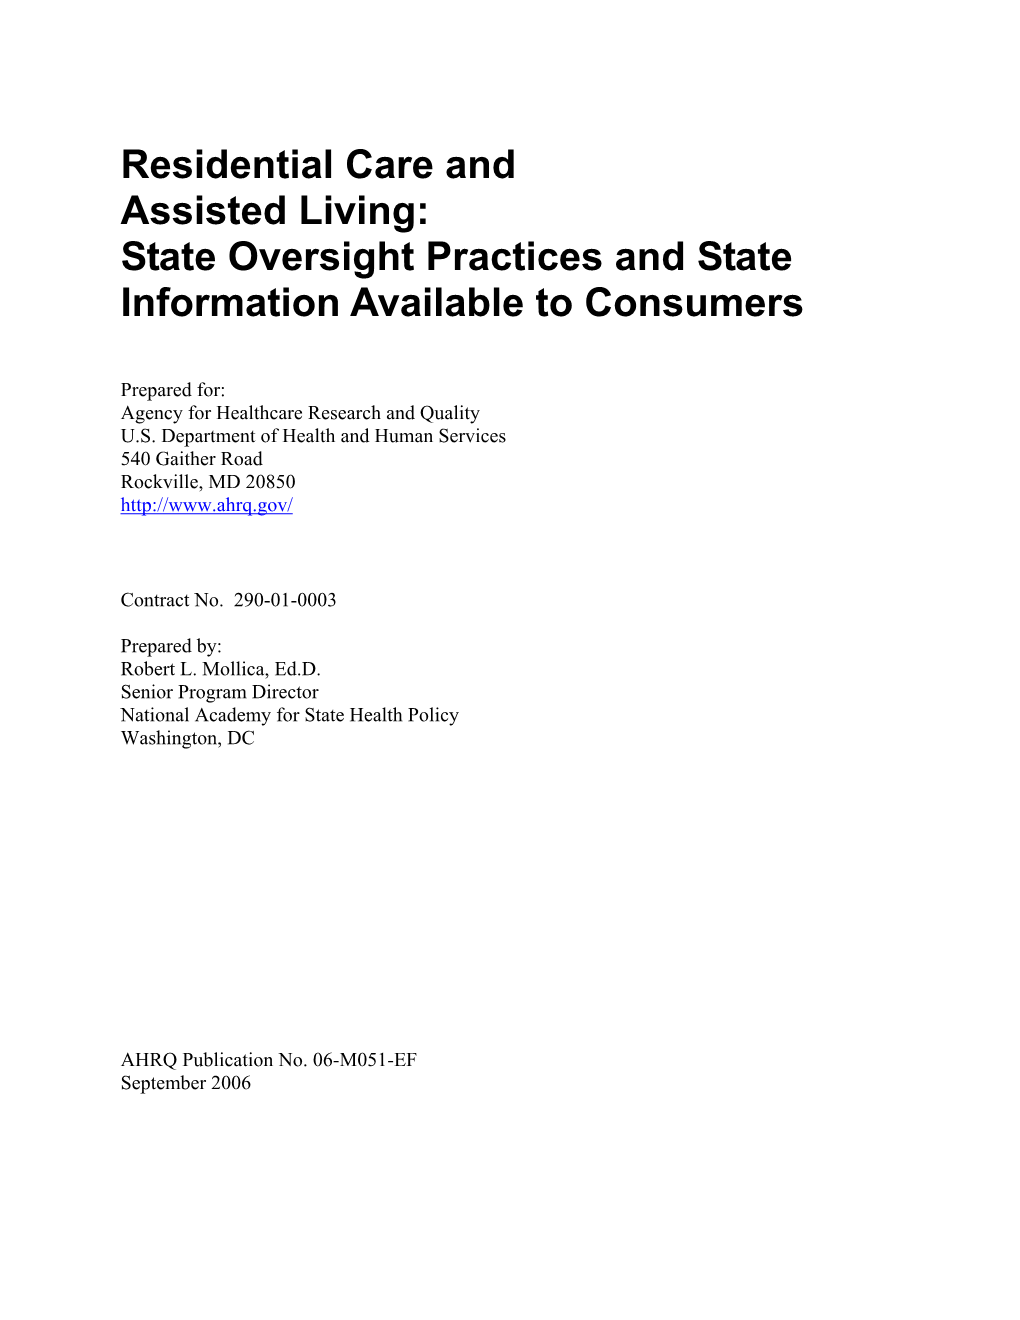 Residential Care and Assisted Living: State Oversight Practices and State Information Available to Consumers